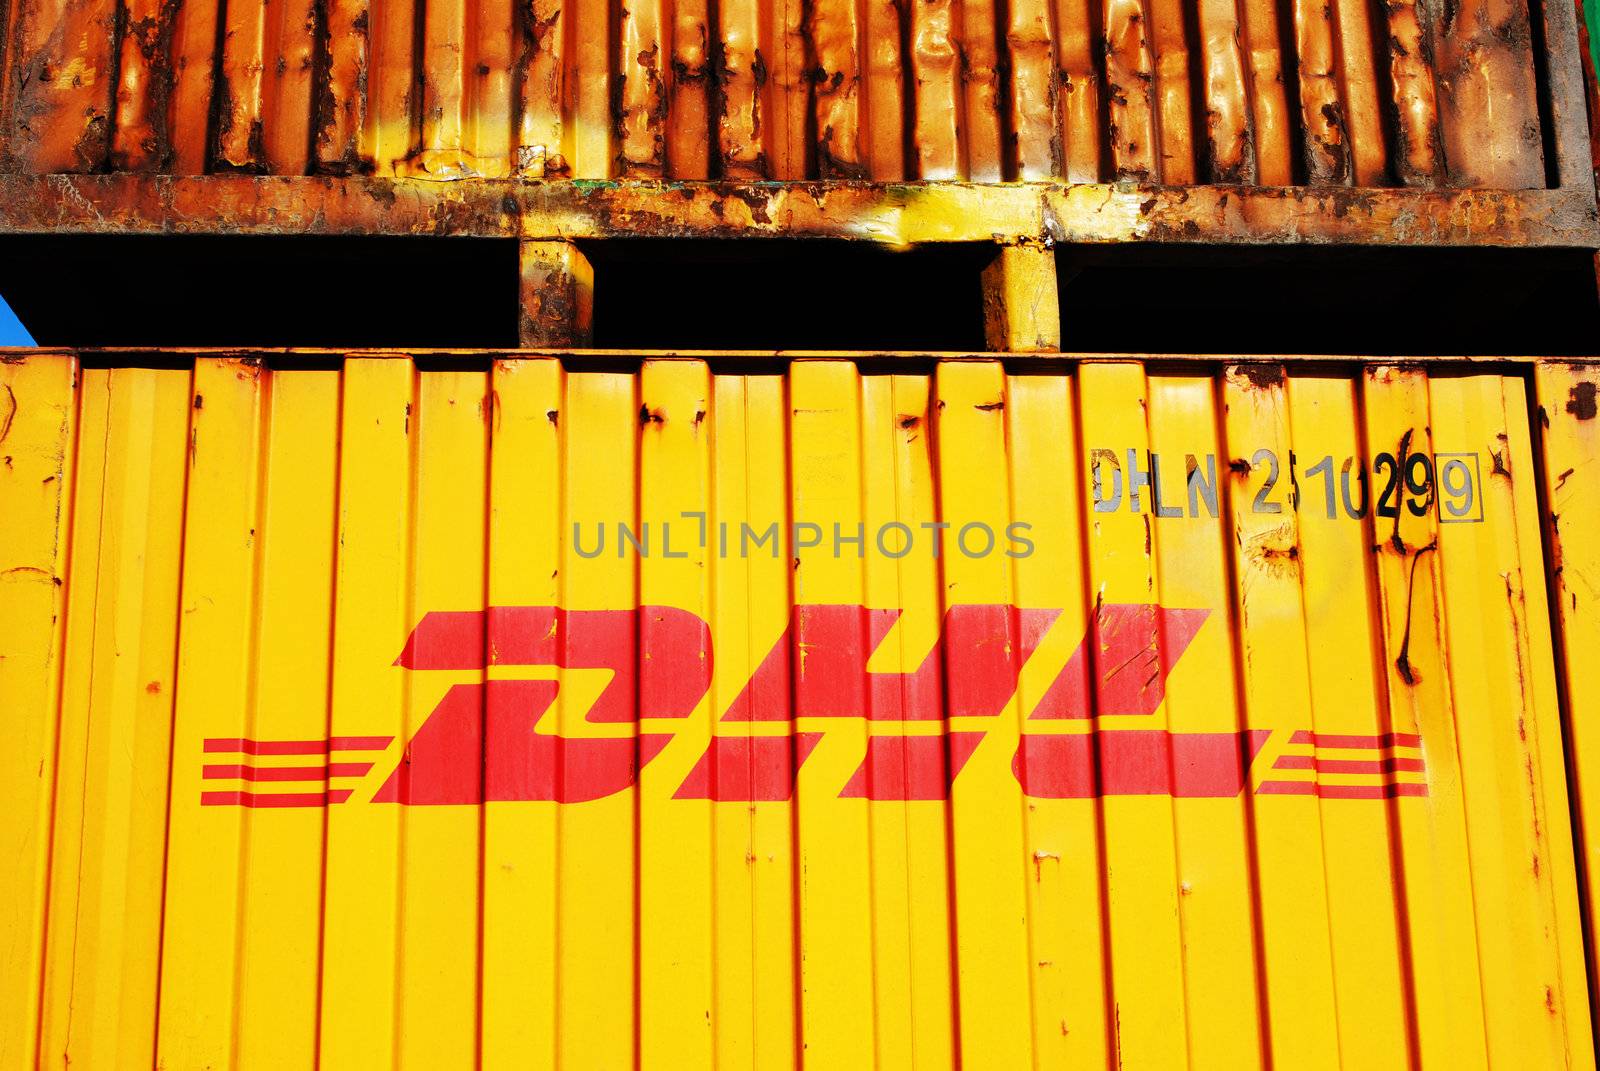 A DHL cargo container.